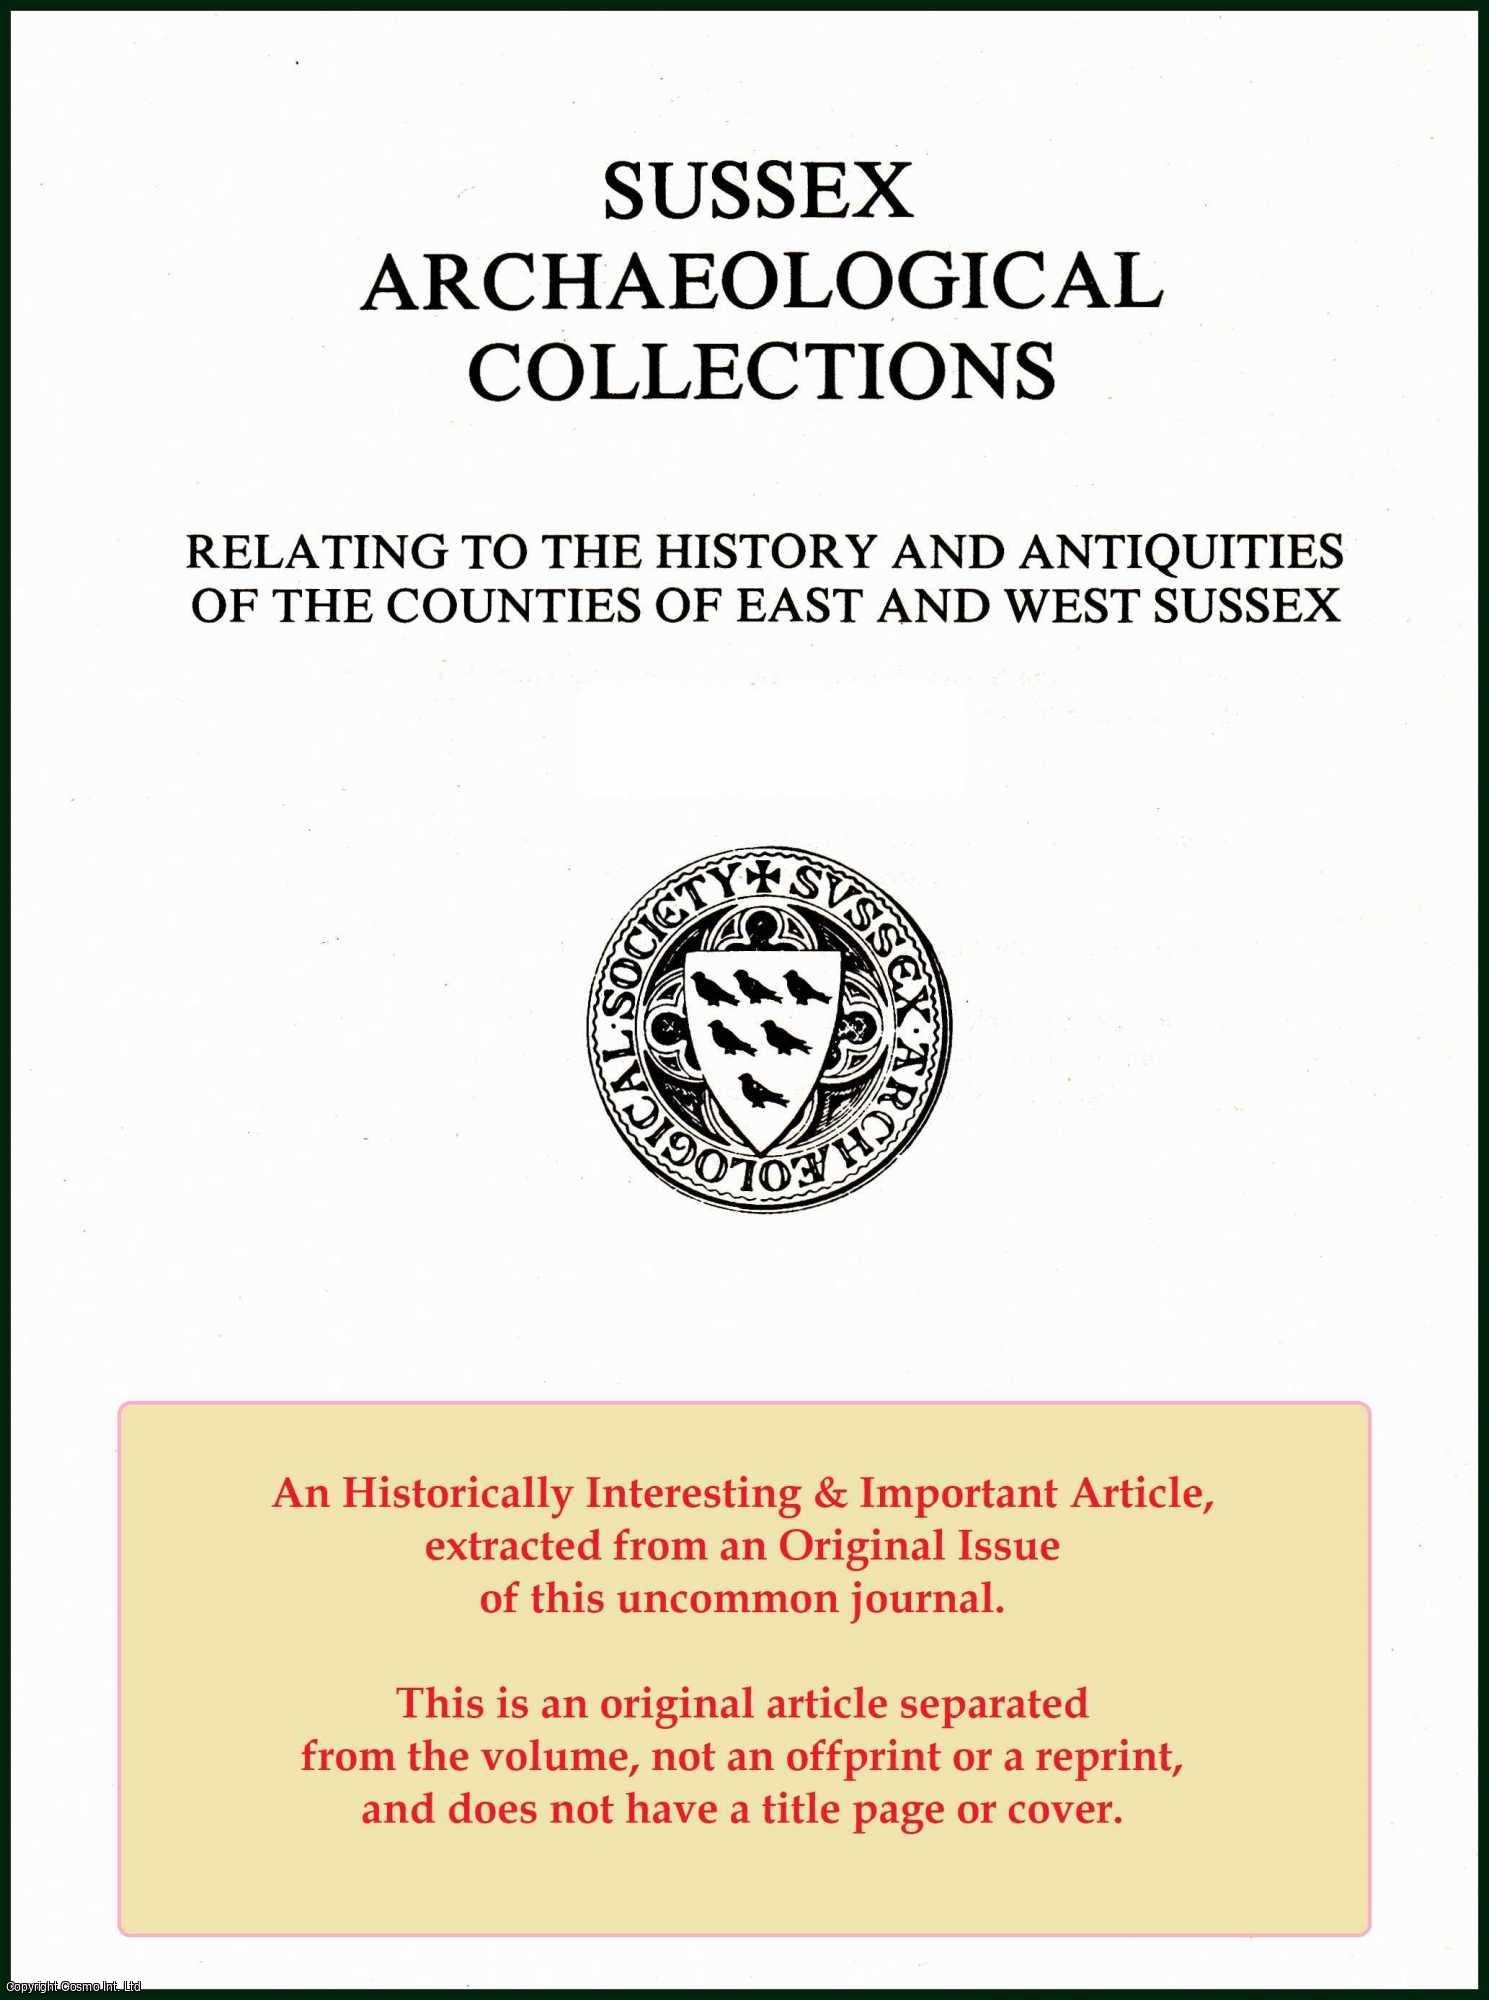 Eric E. Barker - Sussex Anglo-Saxon Charters. An original article from the Journal of the Sussex Archaeological Society, 1949.